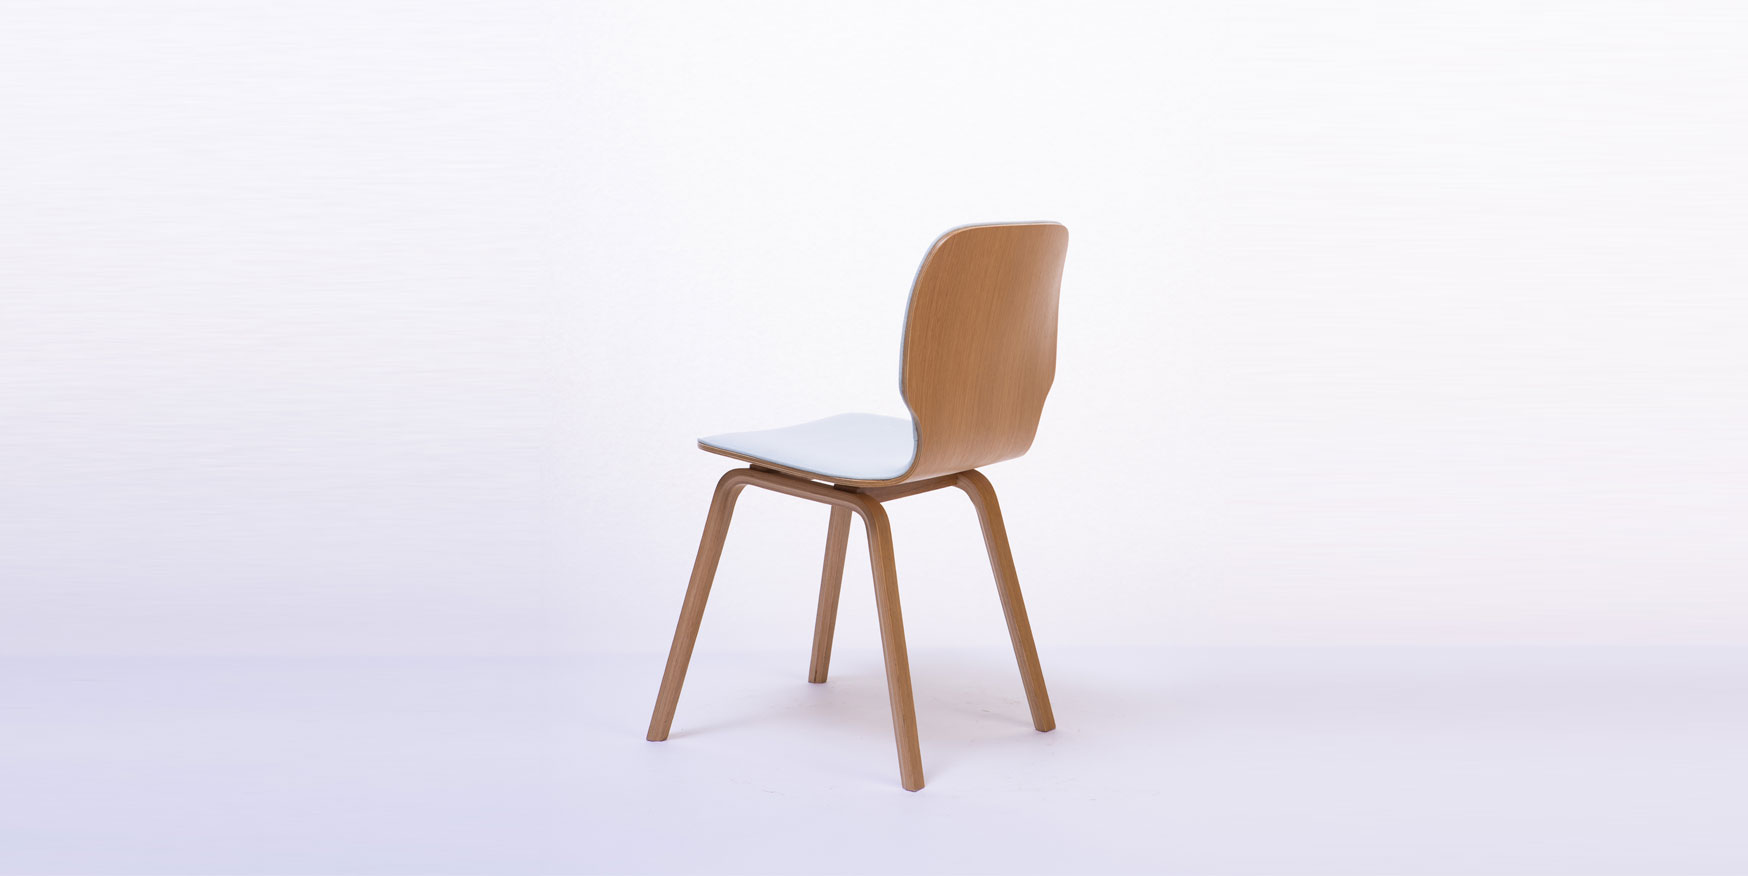 wooden dining chair price
